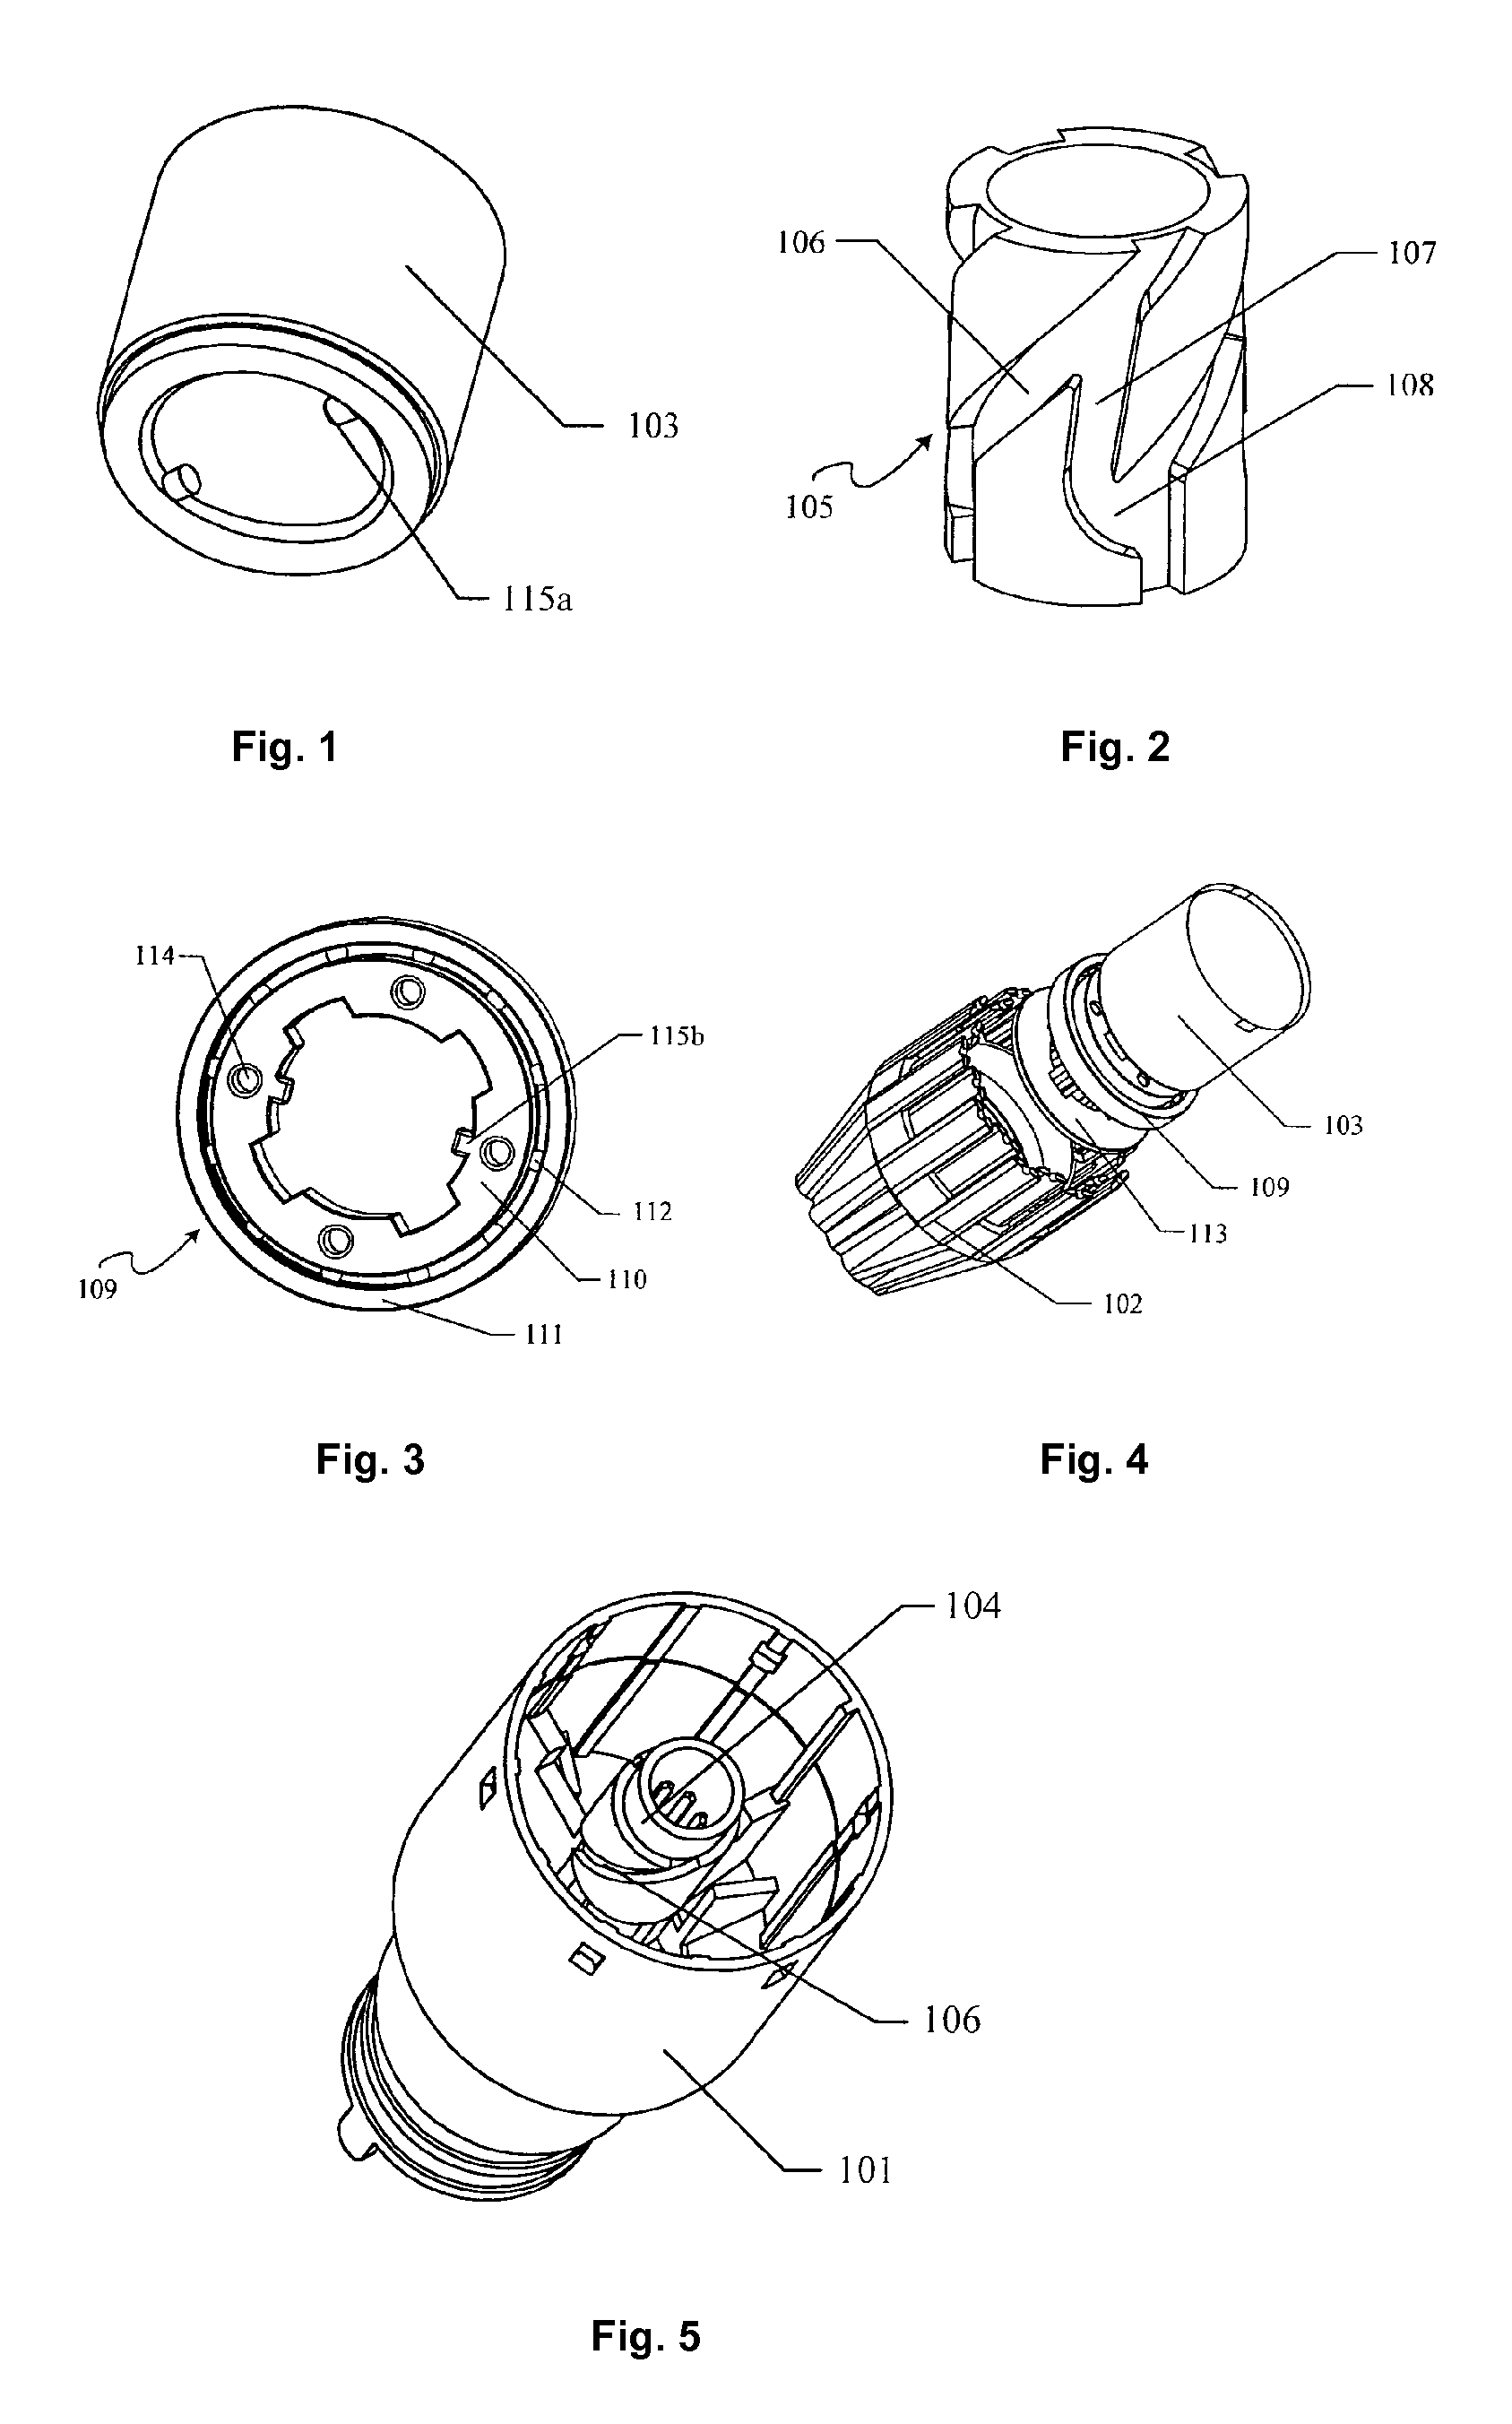 Surgical stapling head assembly with a rotary cutter